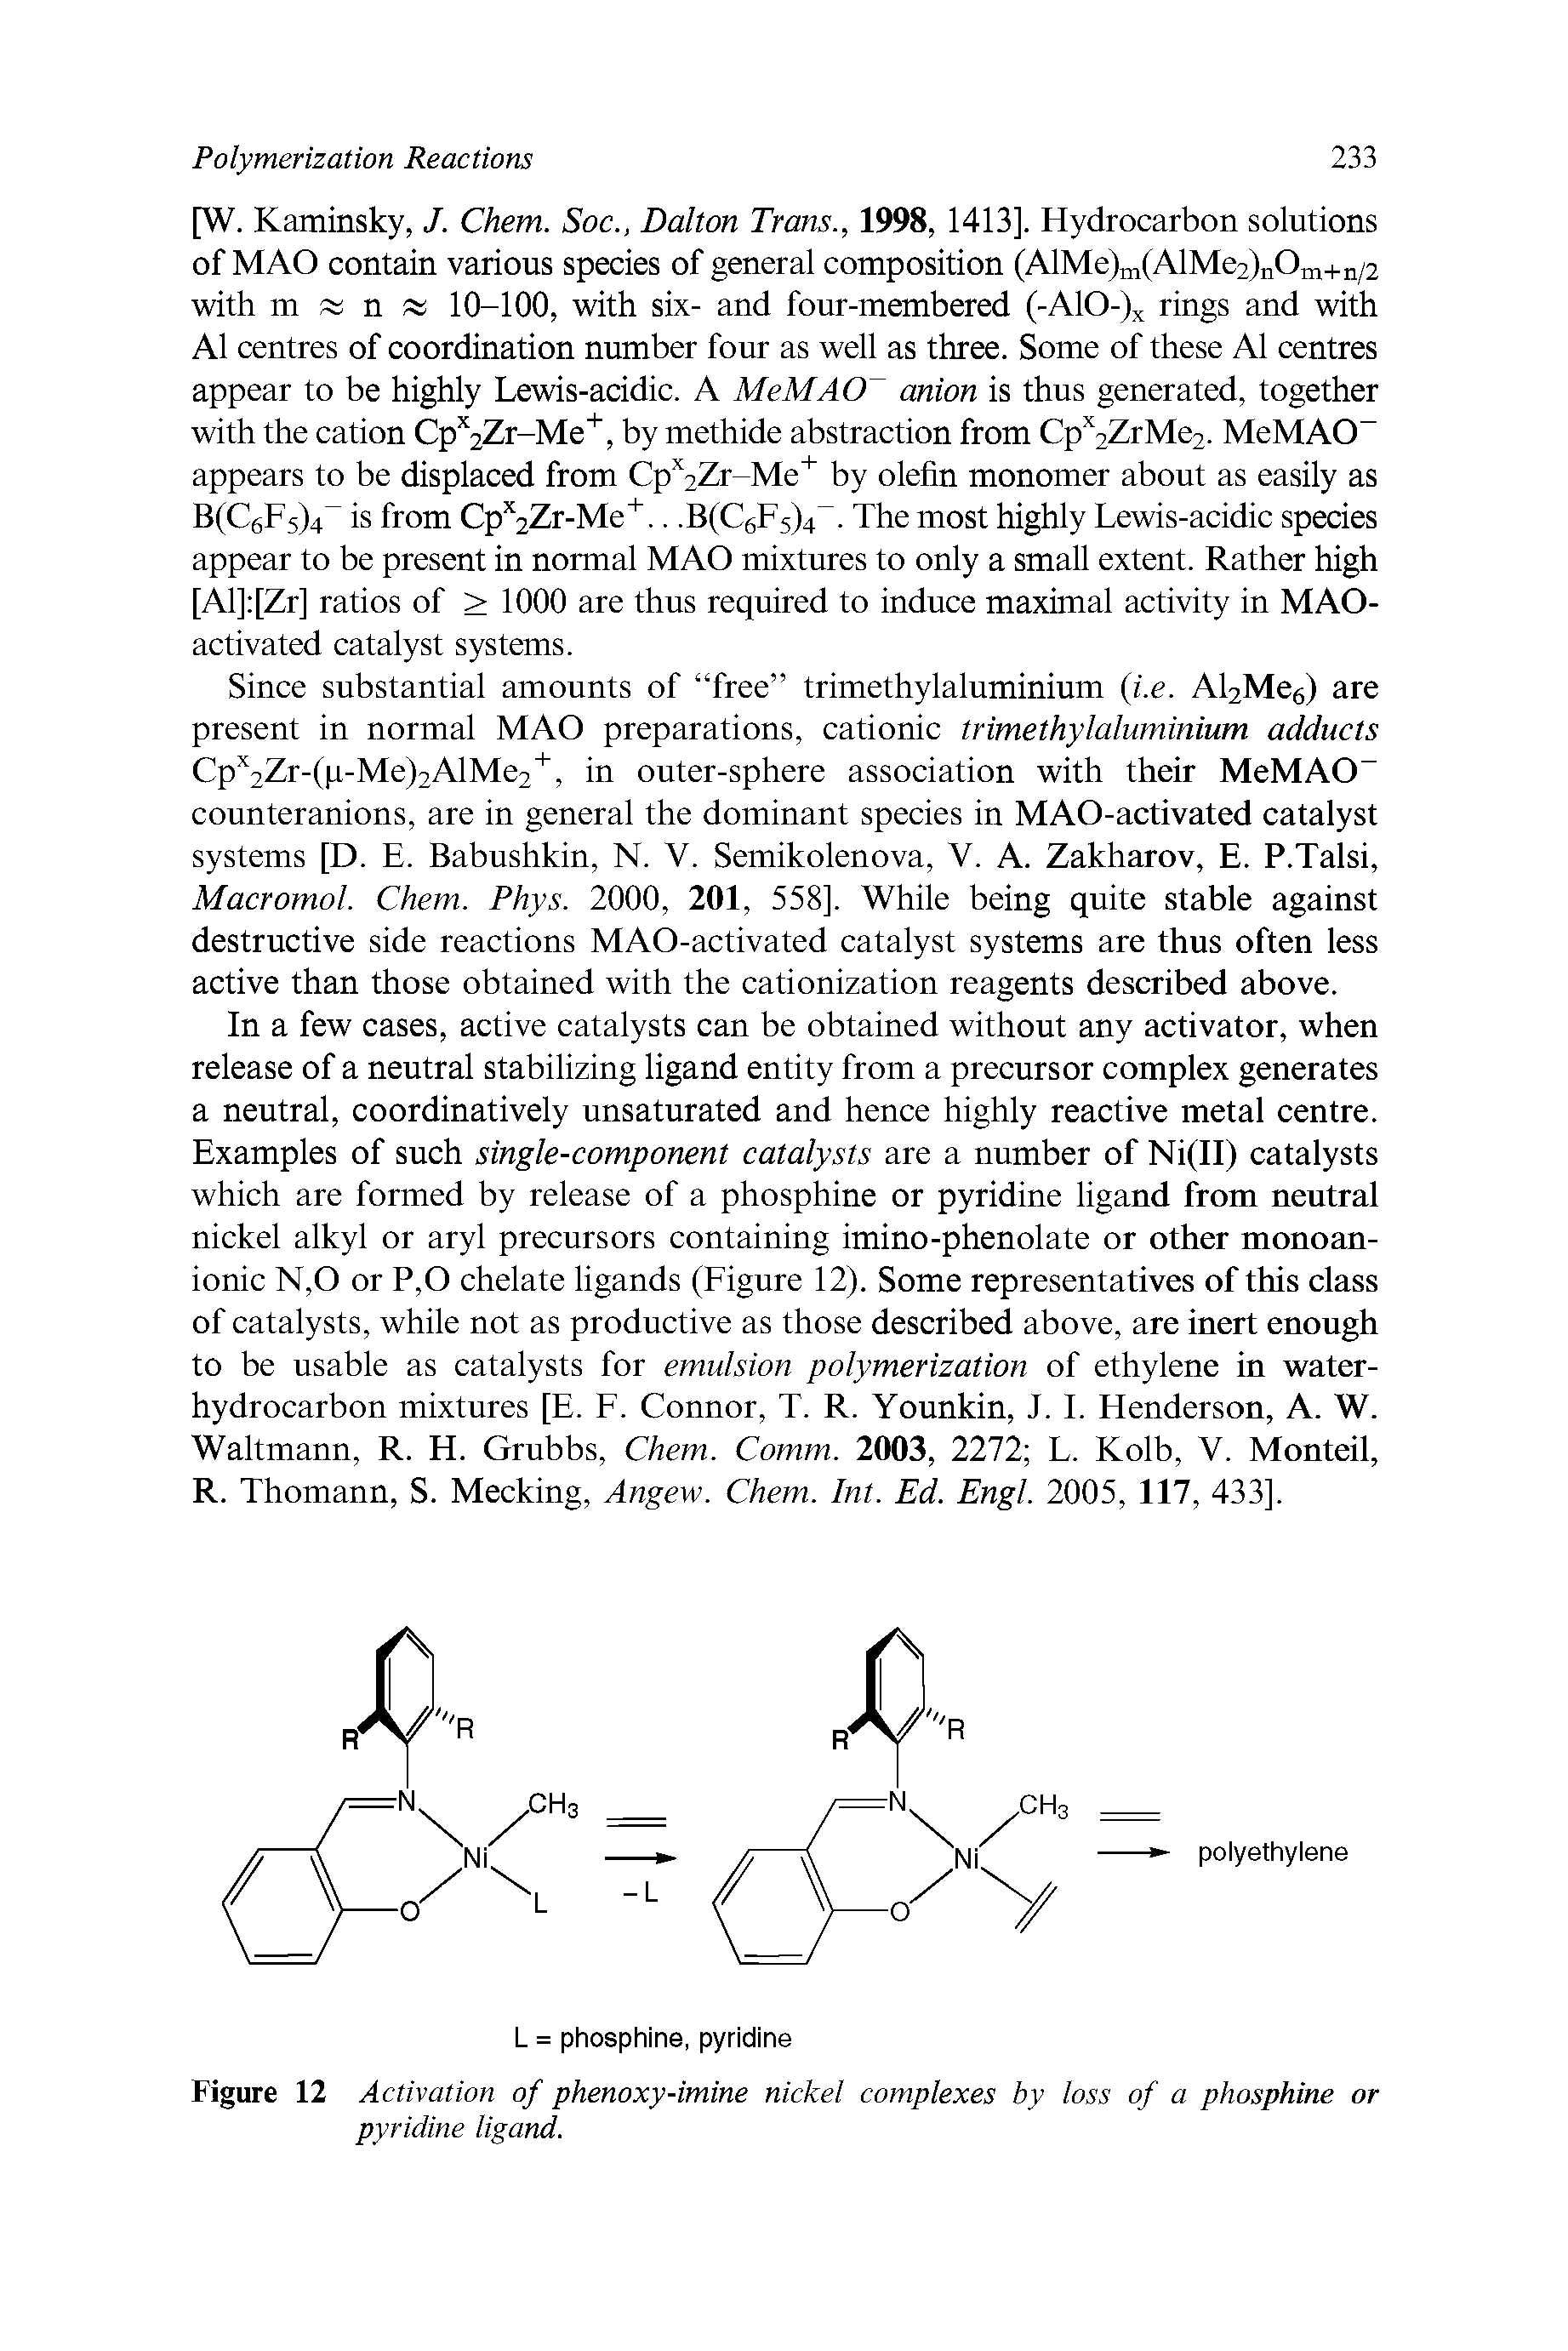 Figure 12 Activation of phenoxy-imine nickel complexes by loss of a phosphine or pyridine ligand.